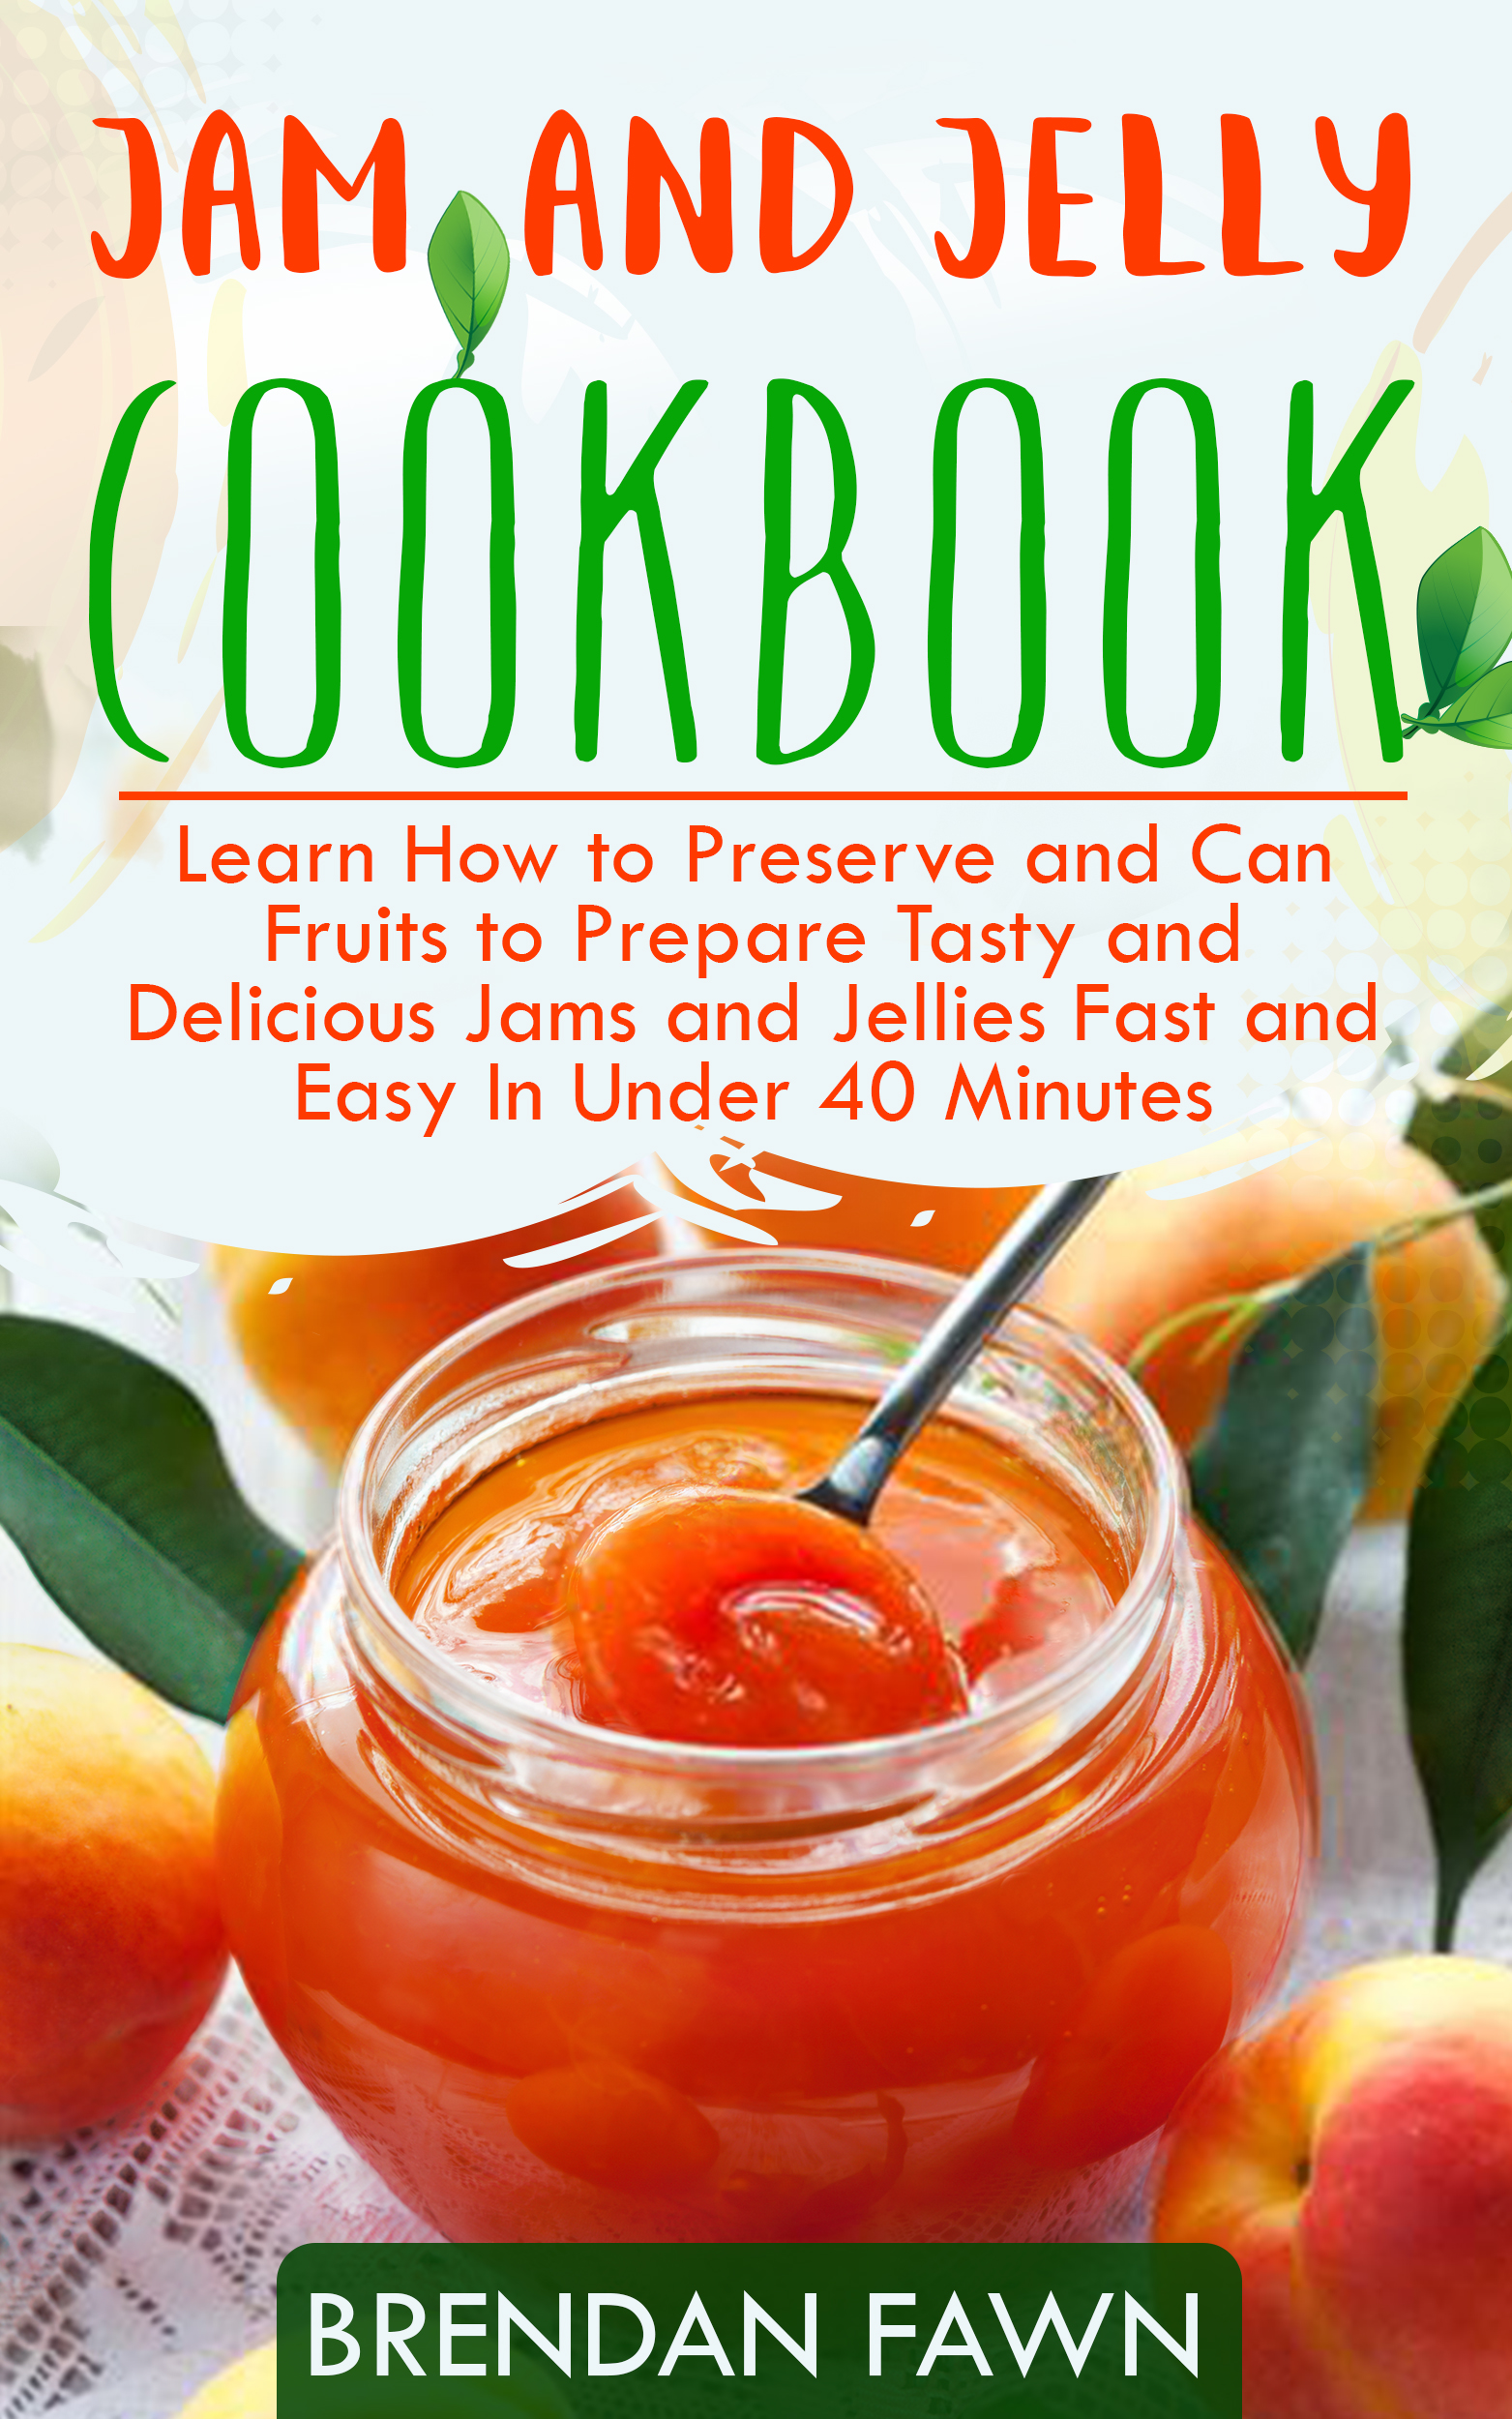 FREE: Jam and Jelly Cookbook: Learn How to Preserve and Can Fruits to Prepare Tasty and Delicious Jams and Jellies Fast and Easy In Under 40 Minutes by Brendan Fawn